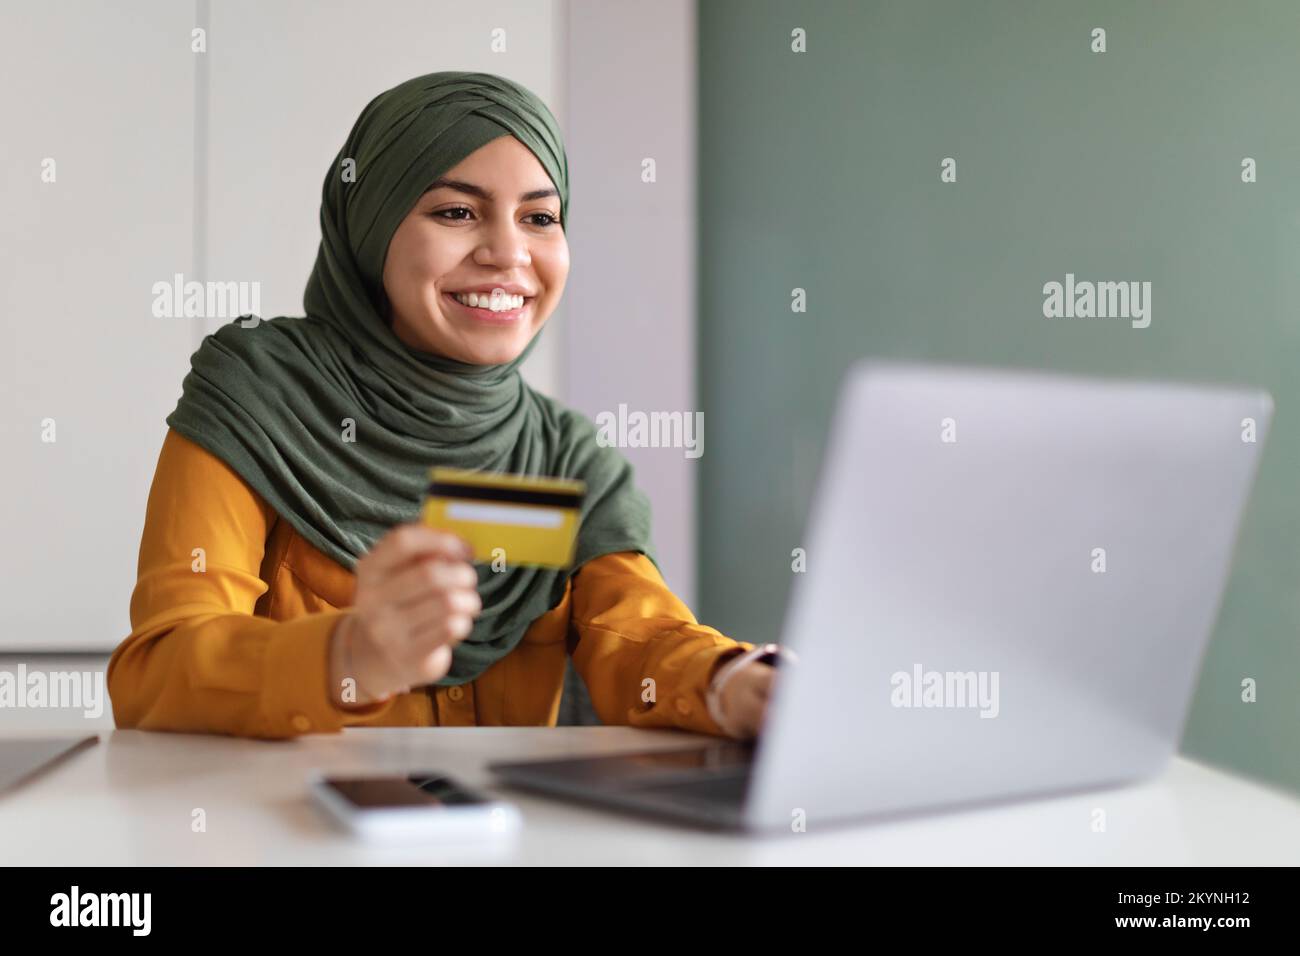 Online Payments. Smiling Muslim Woman In Hijab Using Laptop And Credit Card Stock Photo